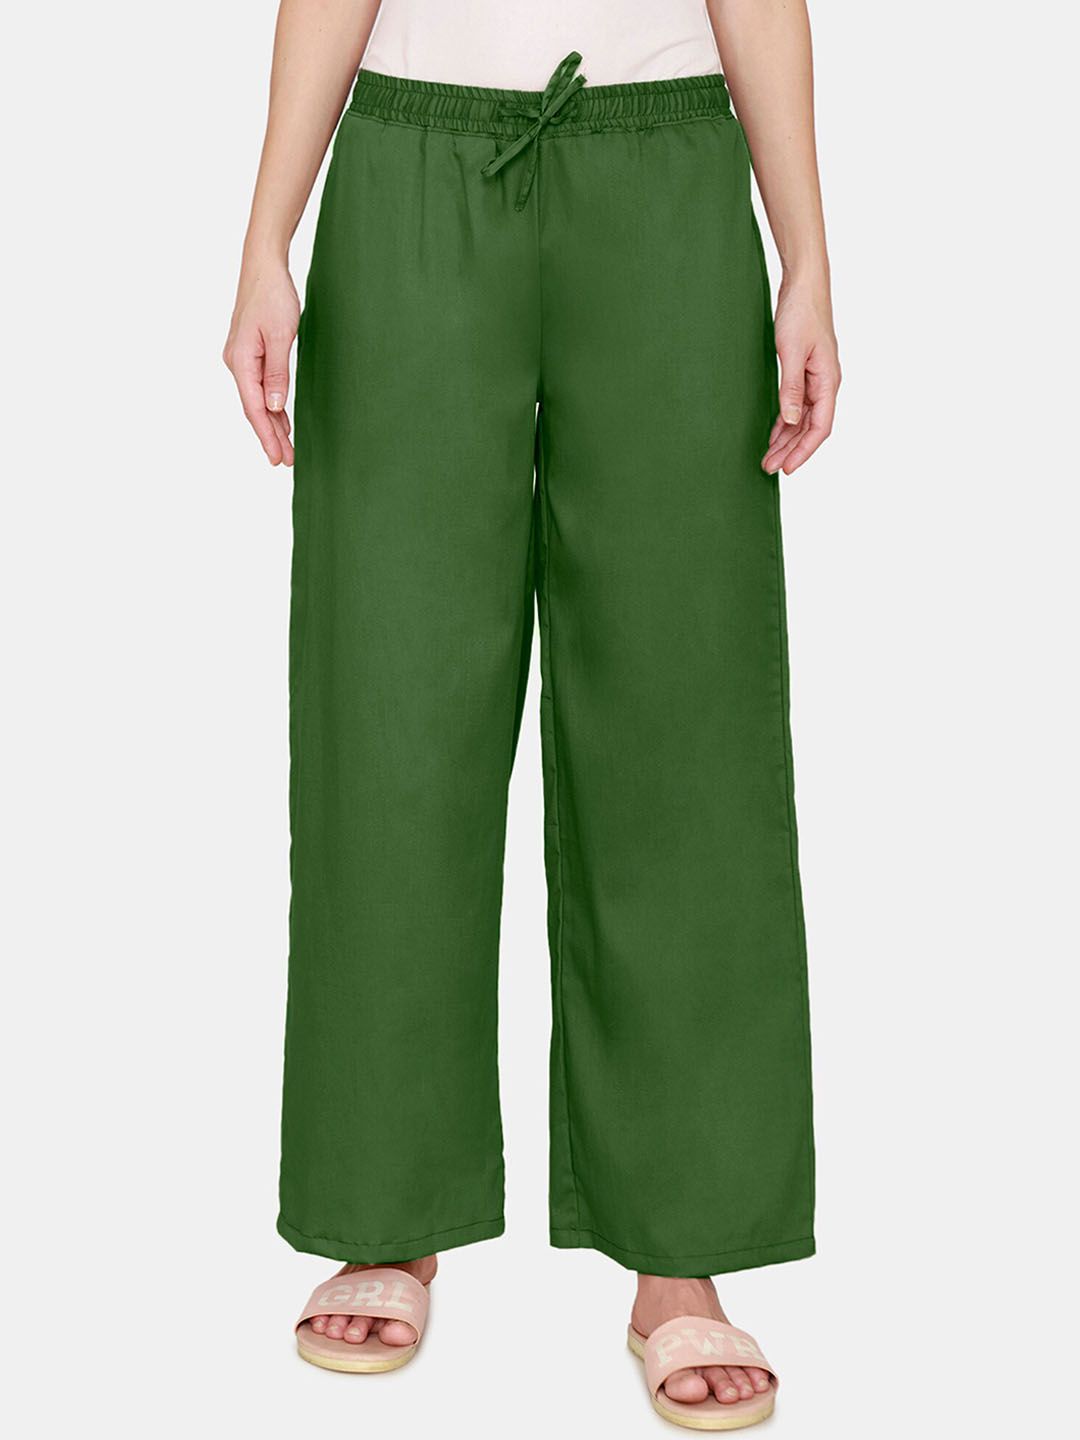 Coucou by Zivame Green Wide Leg Cotton Pyjamas Price in India